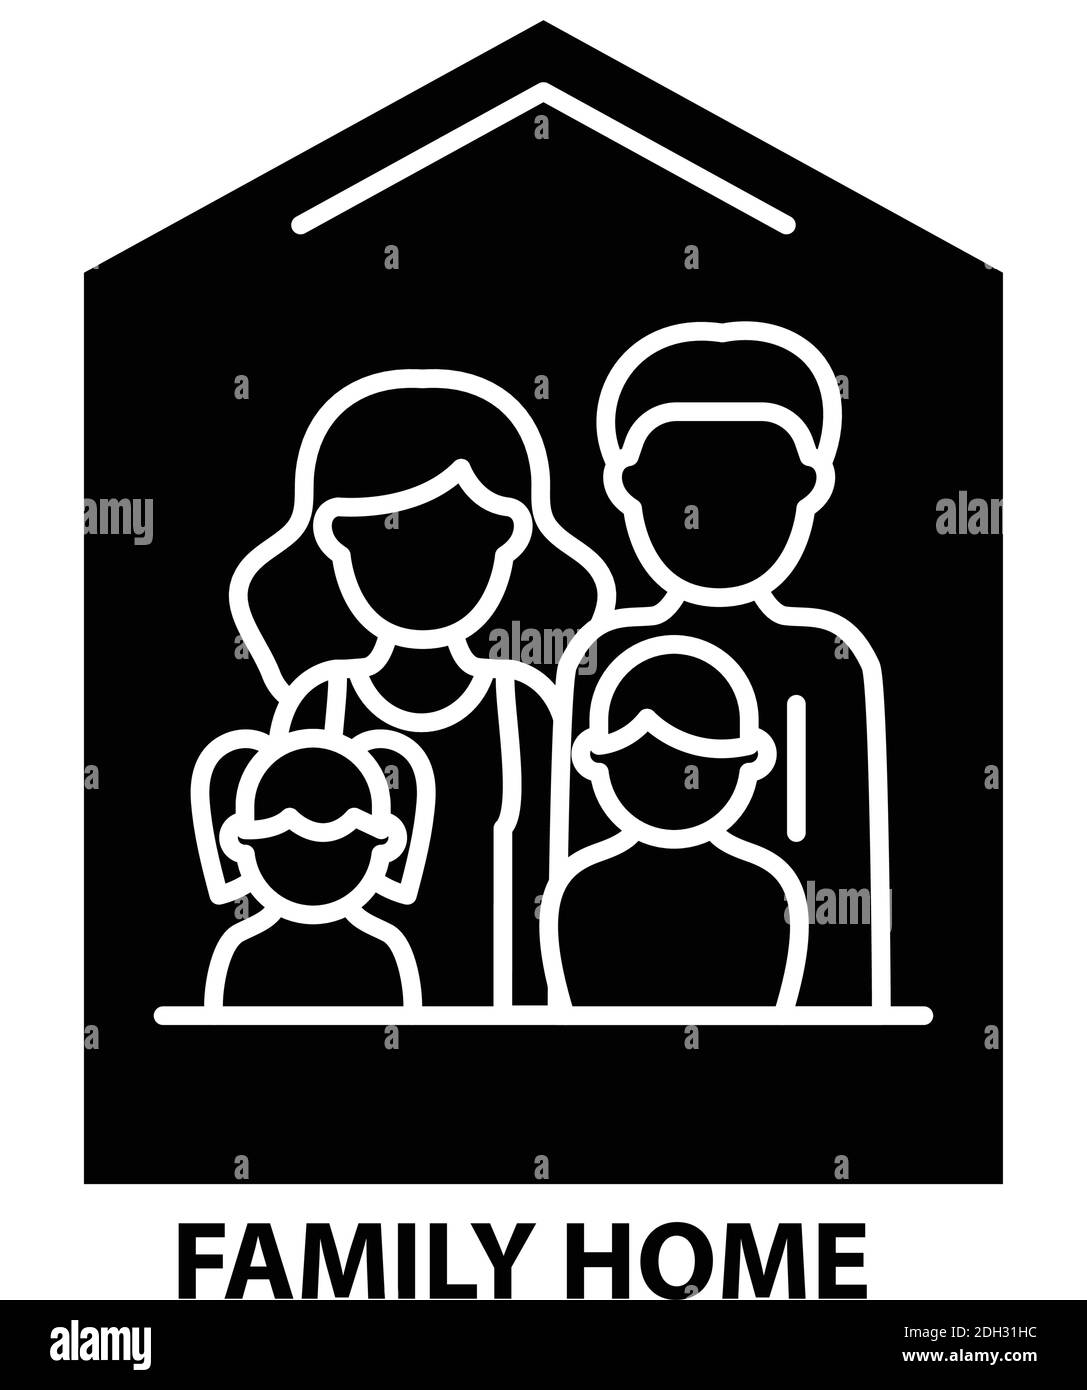 family home icon, black vector sign with editable strokes, concept illustration Stock Vector